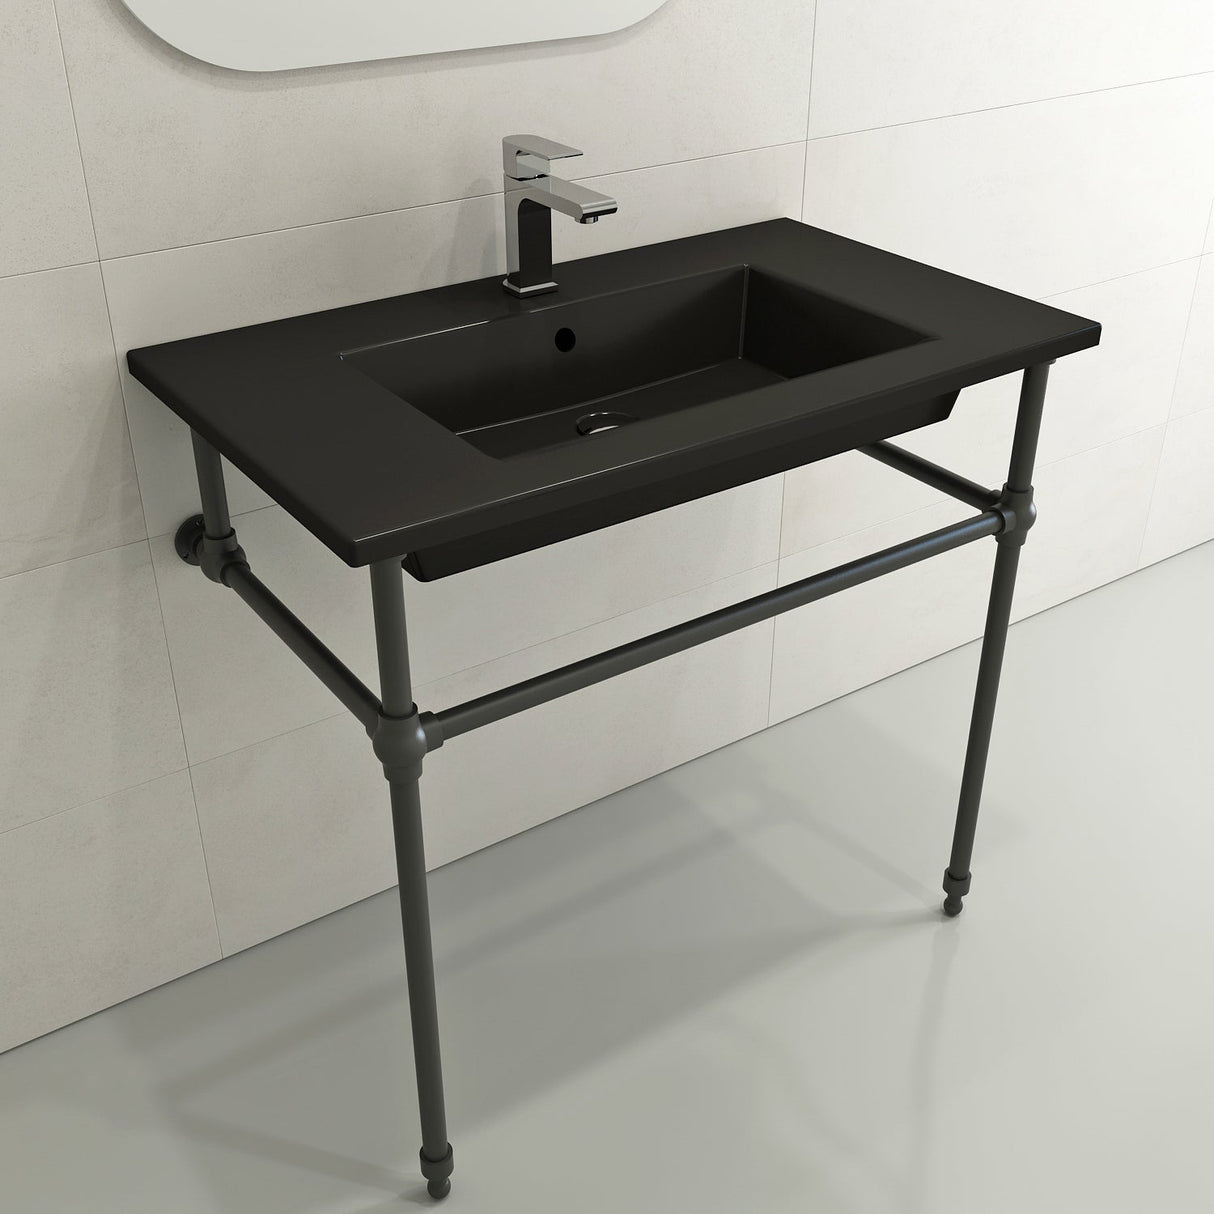 BOCCHI 1113-004-0126 Ravenna Wall-Mounted Sink Fireclay 32.25 in. 1-Hole with Overflow in Matte Black